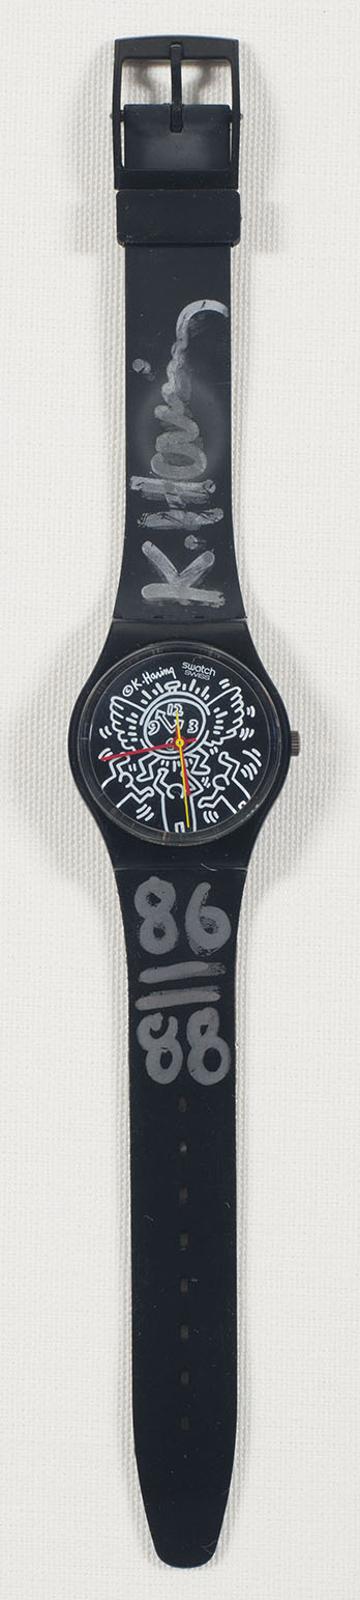 Keith Haring (1958-1990) - Swatch Watch